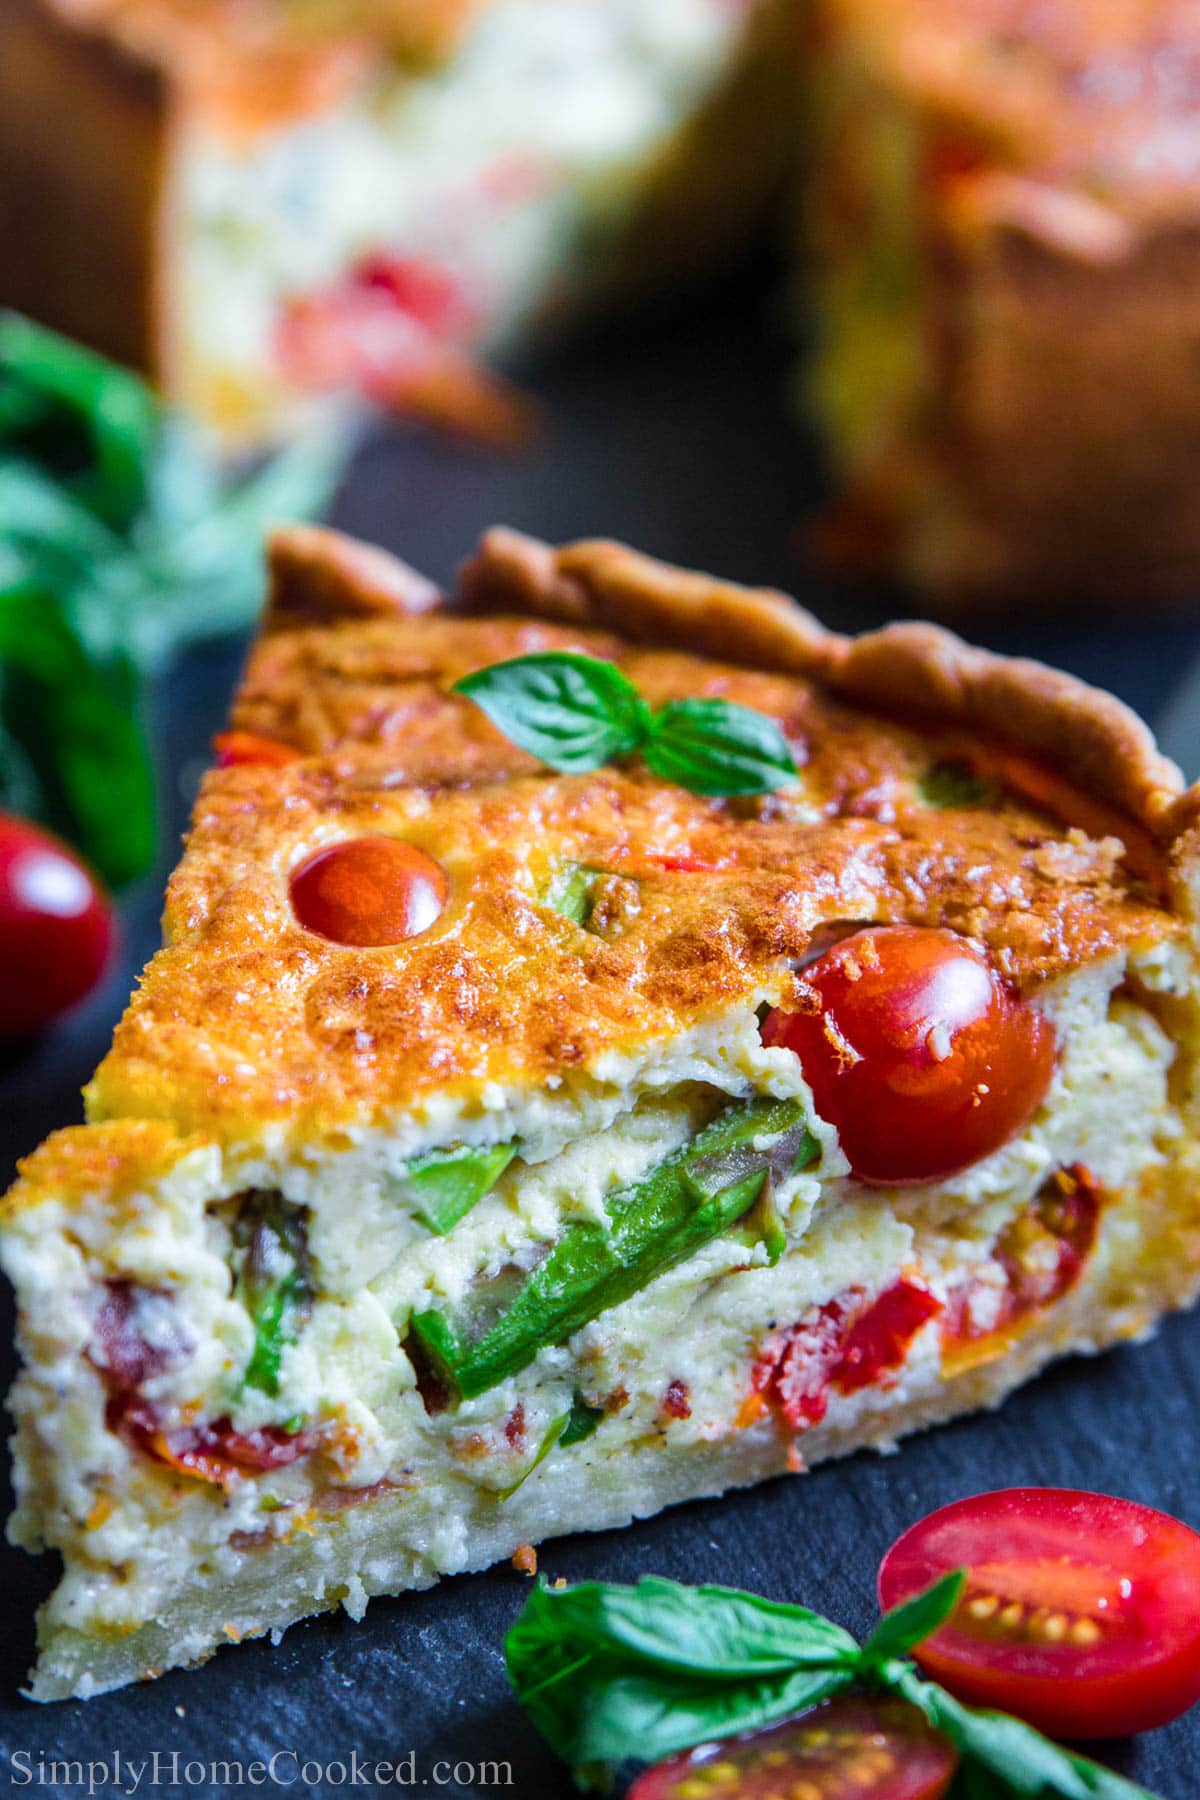 Slice of Quiche Lorraine with asparagus and cherry tomatoes.